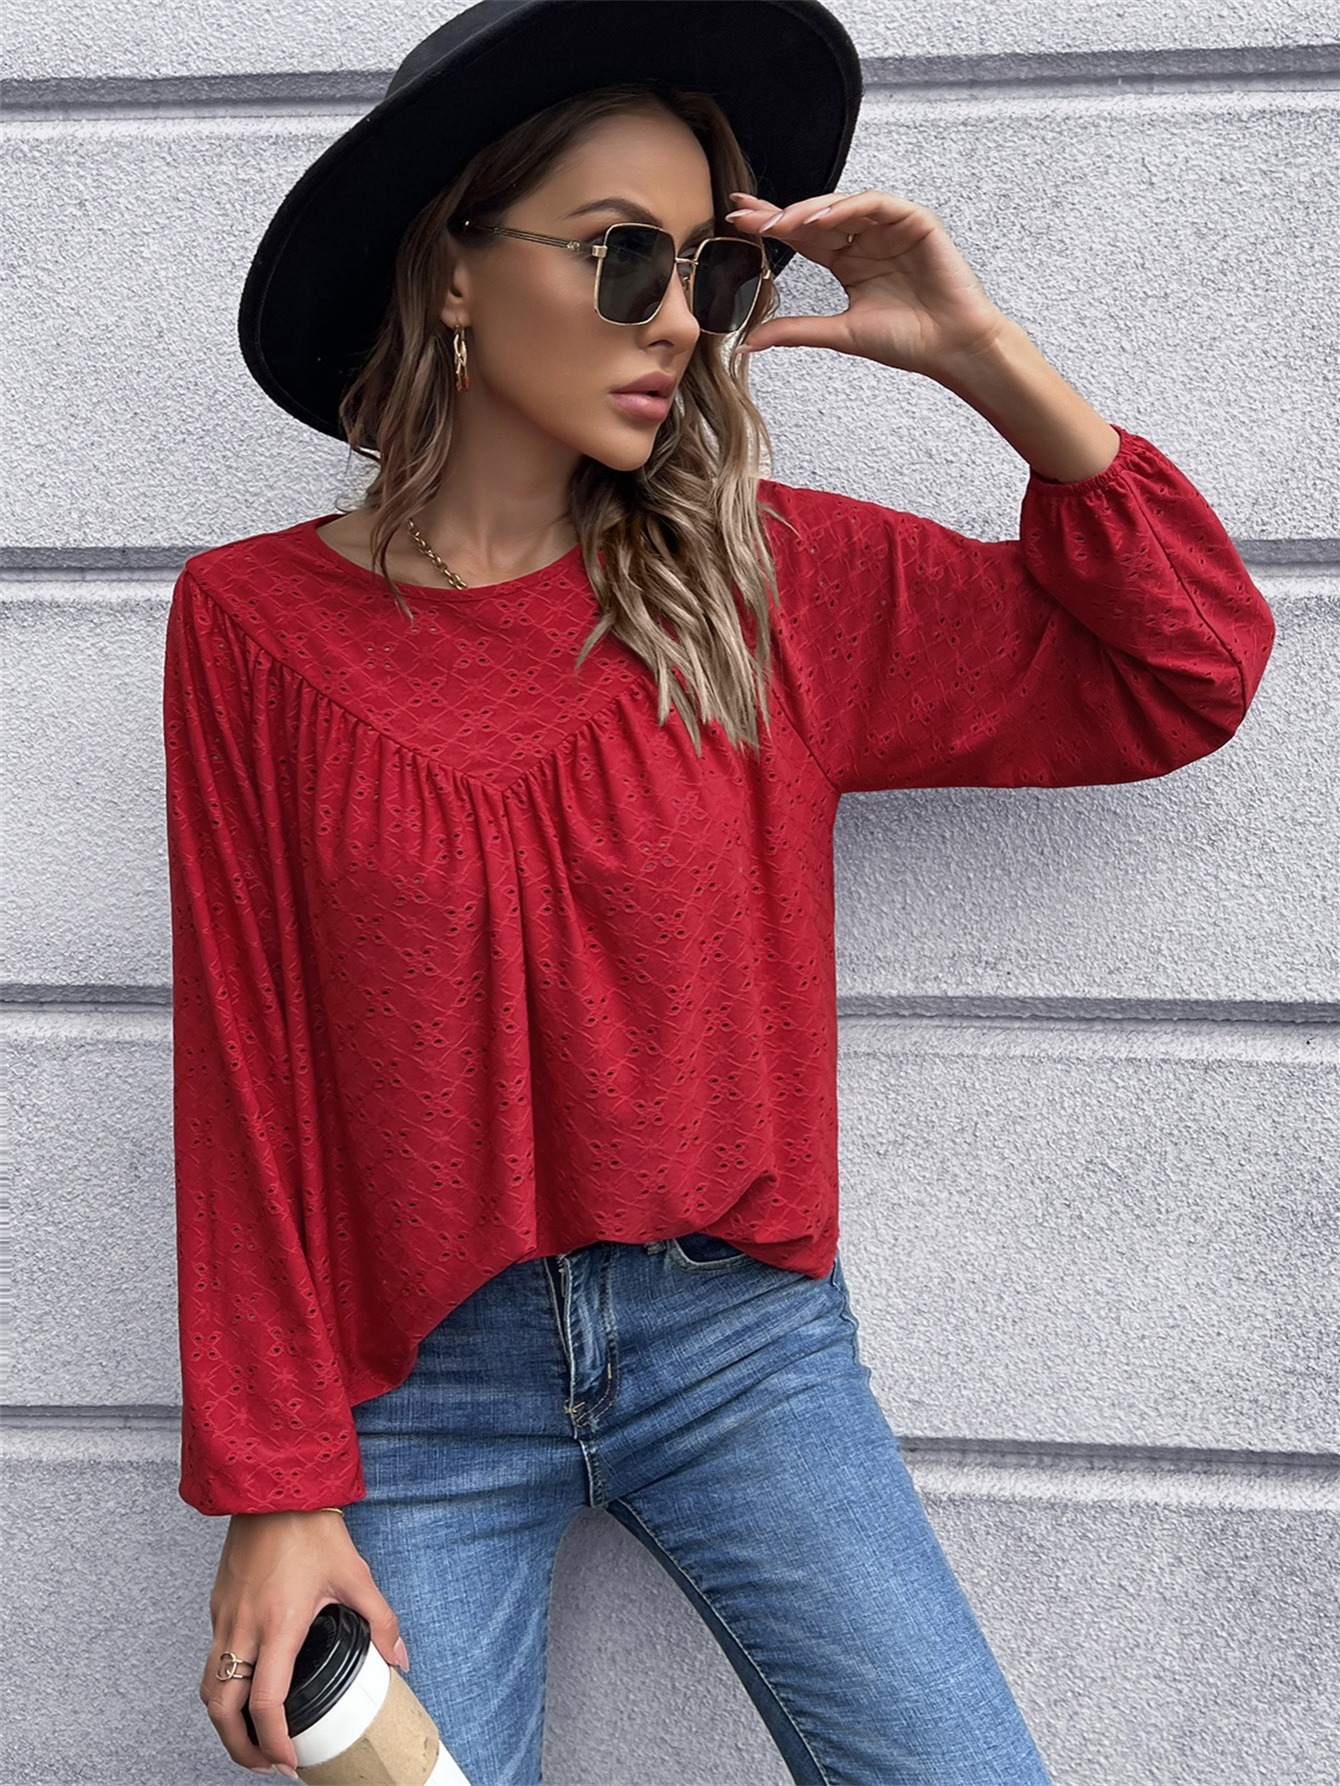 Fashion Ladies Casual Tops T-Shirt Women Summer Loose Top Long Sleeve  Blouse 